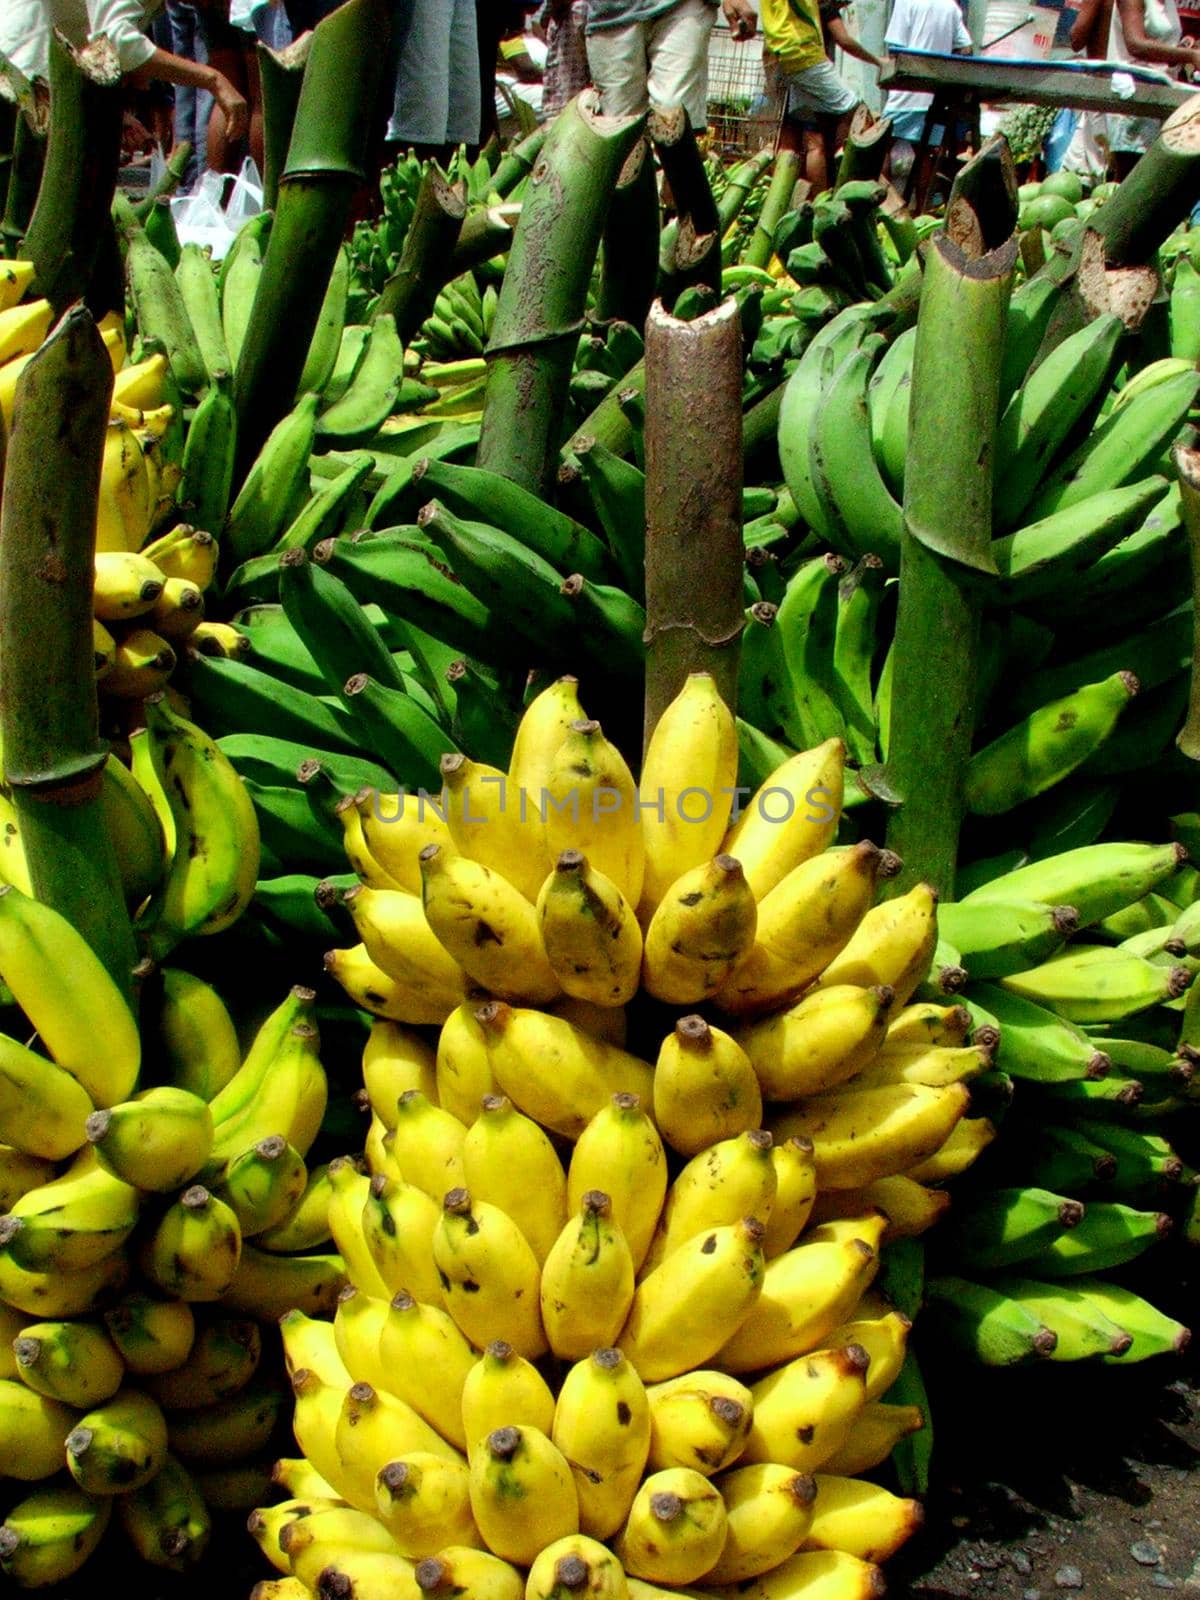 salvador, bahia / brazil - eeptember 11, 2005: Bananas are seen for sale at a free market in the city of Salvador